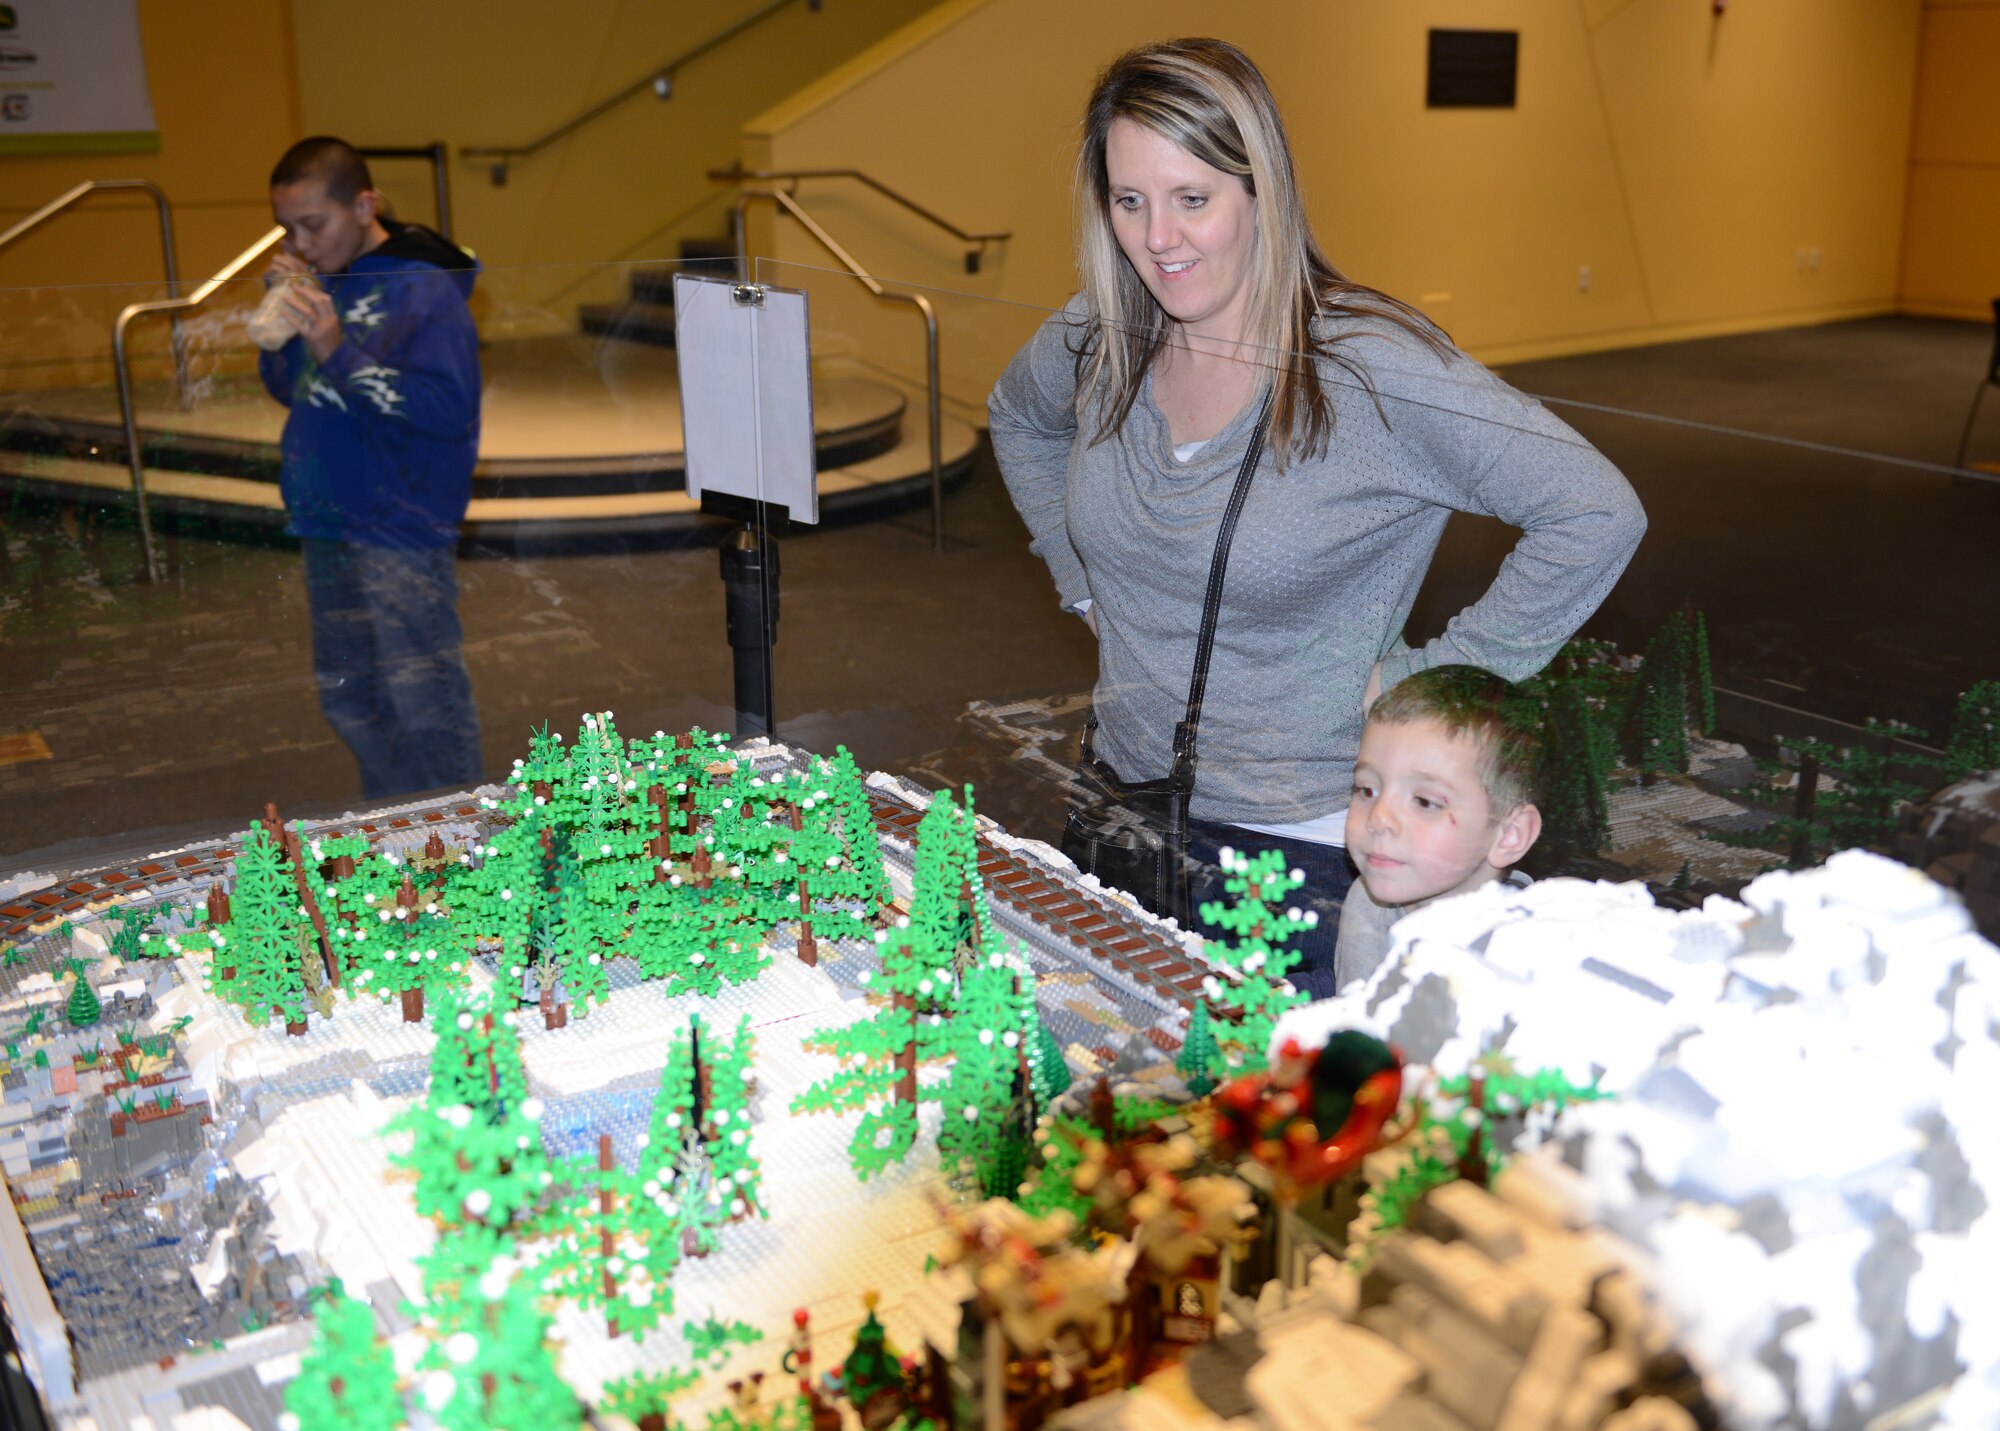 Science Center of Iowa on December 19, 2014, Military Family Connection Night sponsored by the Child and Youth Program of the Iowa National Guard. Master Sergeant Katherine Schultz showing her son the holiday Lego display.(U.S. Air National Guard photo by Technical Sgt. Michael McGhee/Released by Master Sgt. Robert P. Shepherd)